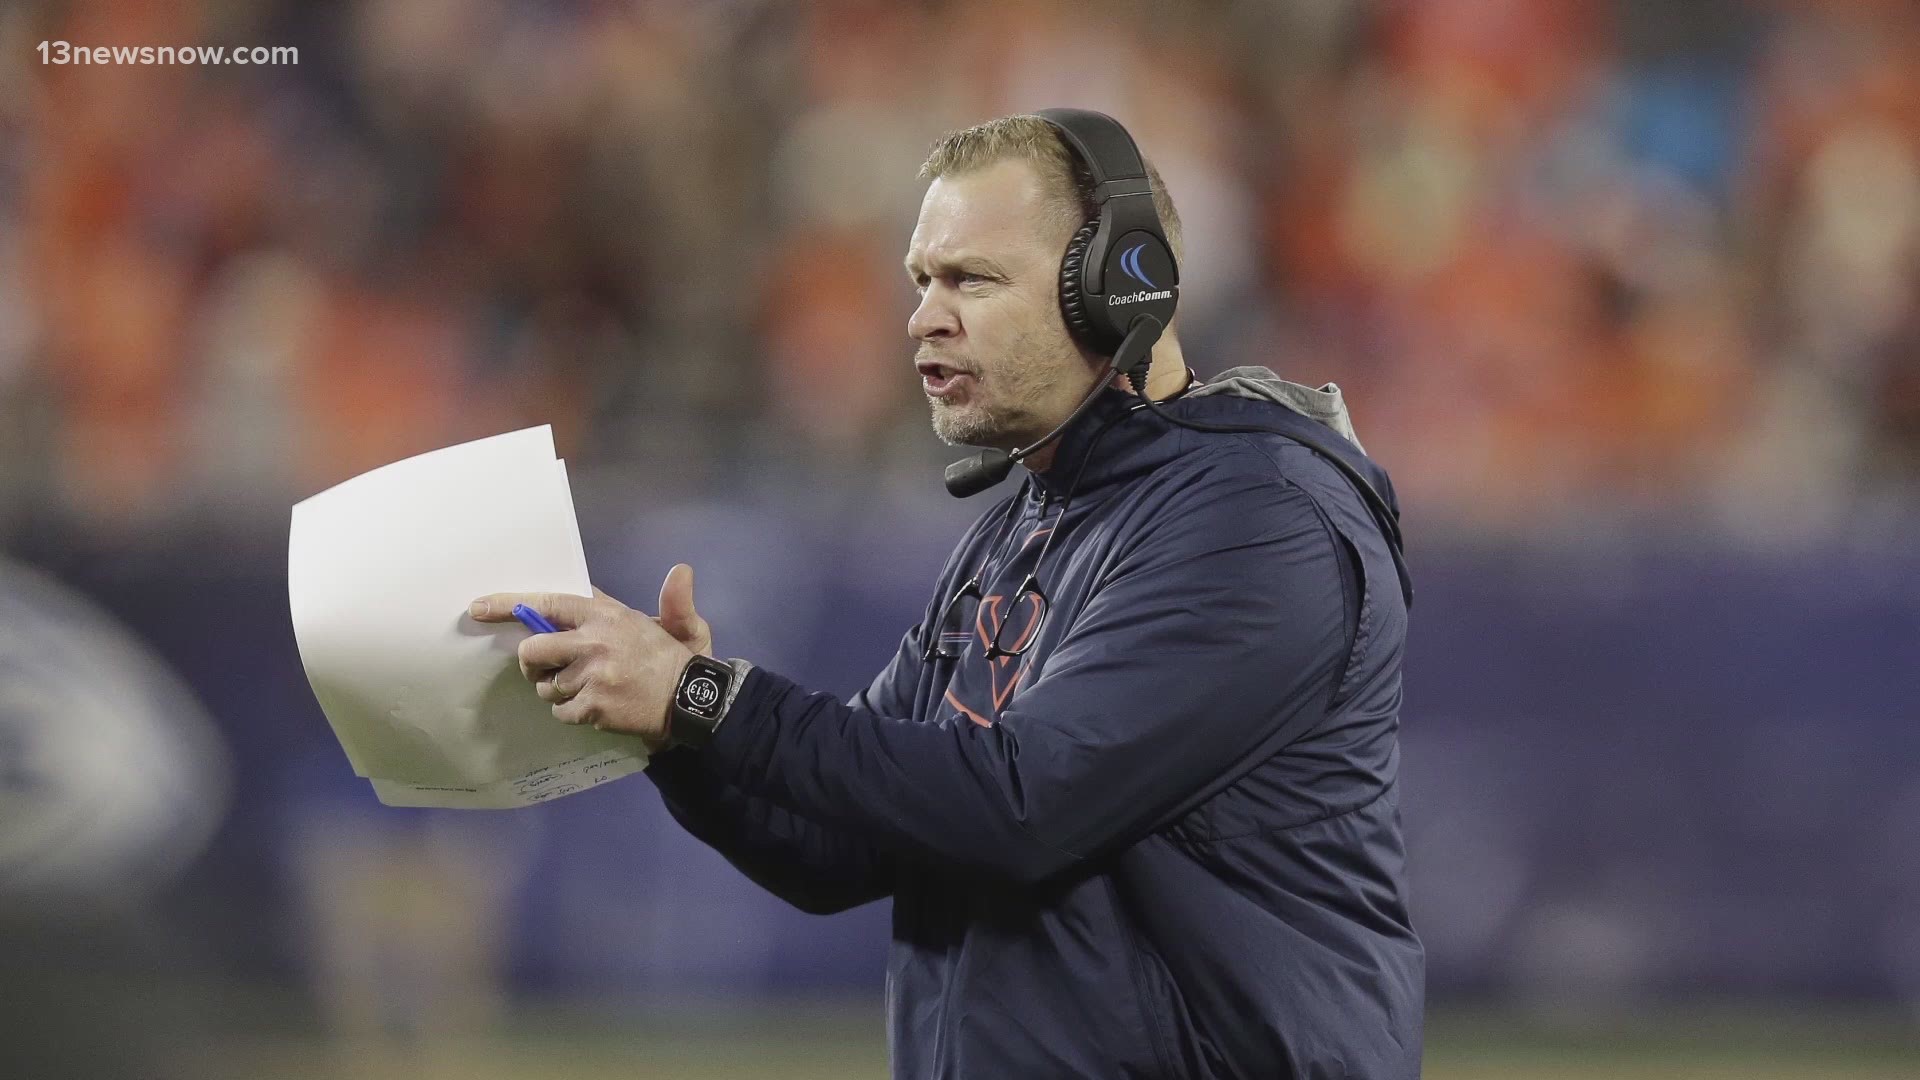 Head Coach Bronco Mendenhall with the latest on workouts and preparation